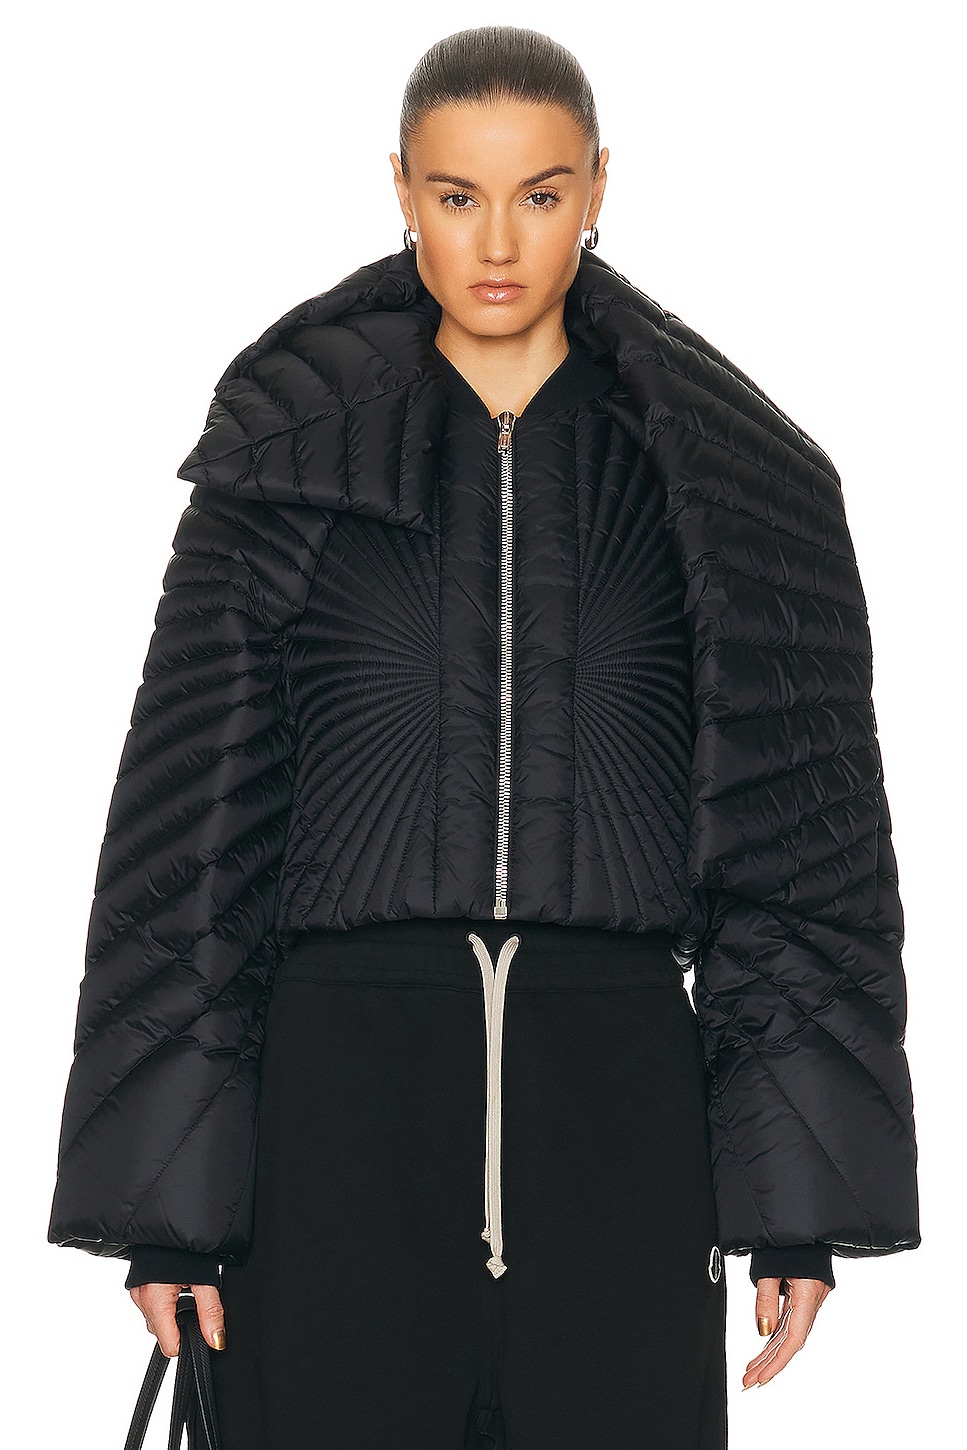 Image 1 of Rick Owens X Moncler Radiance Convertible Jacket in Black